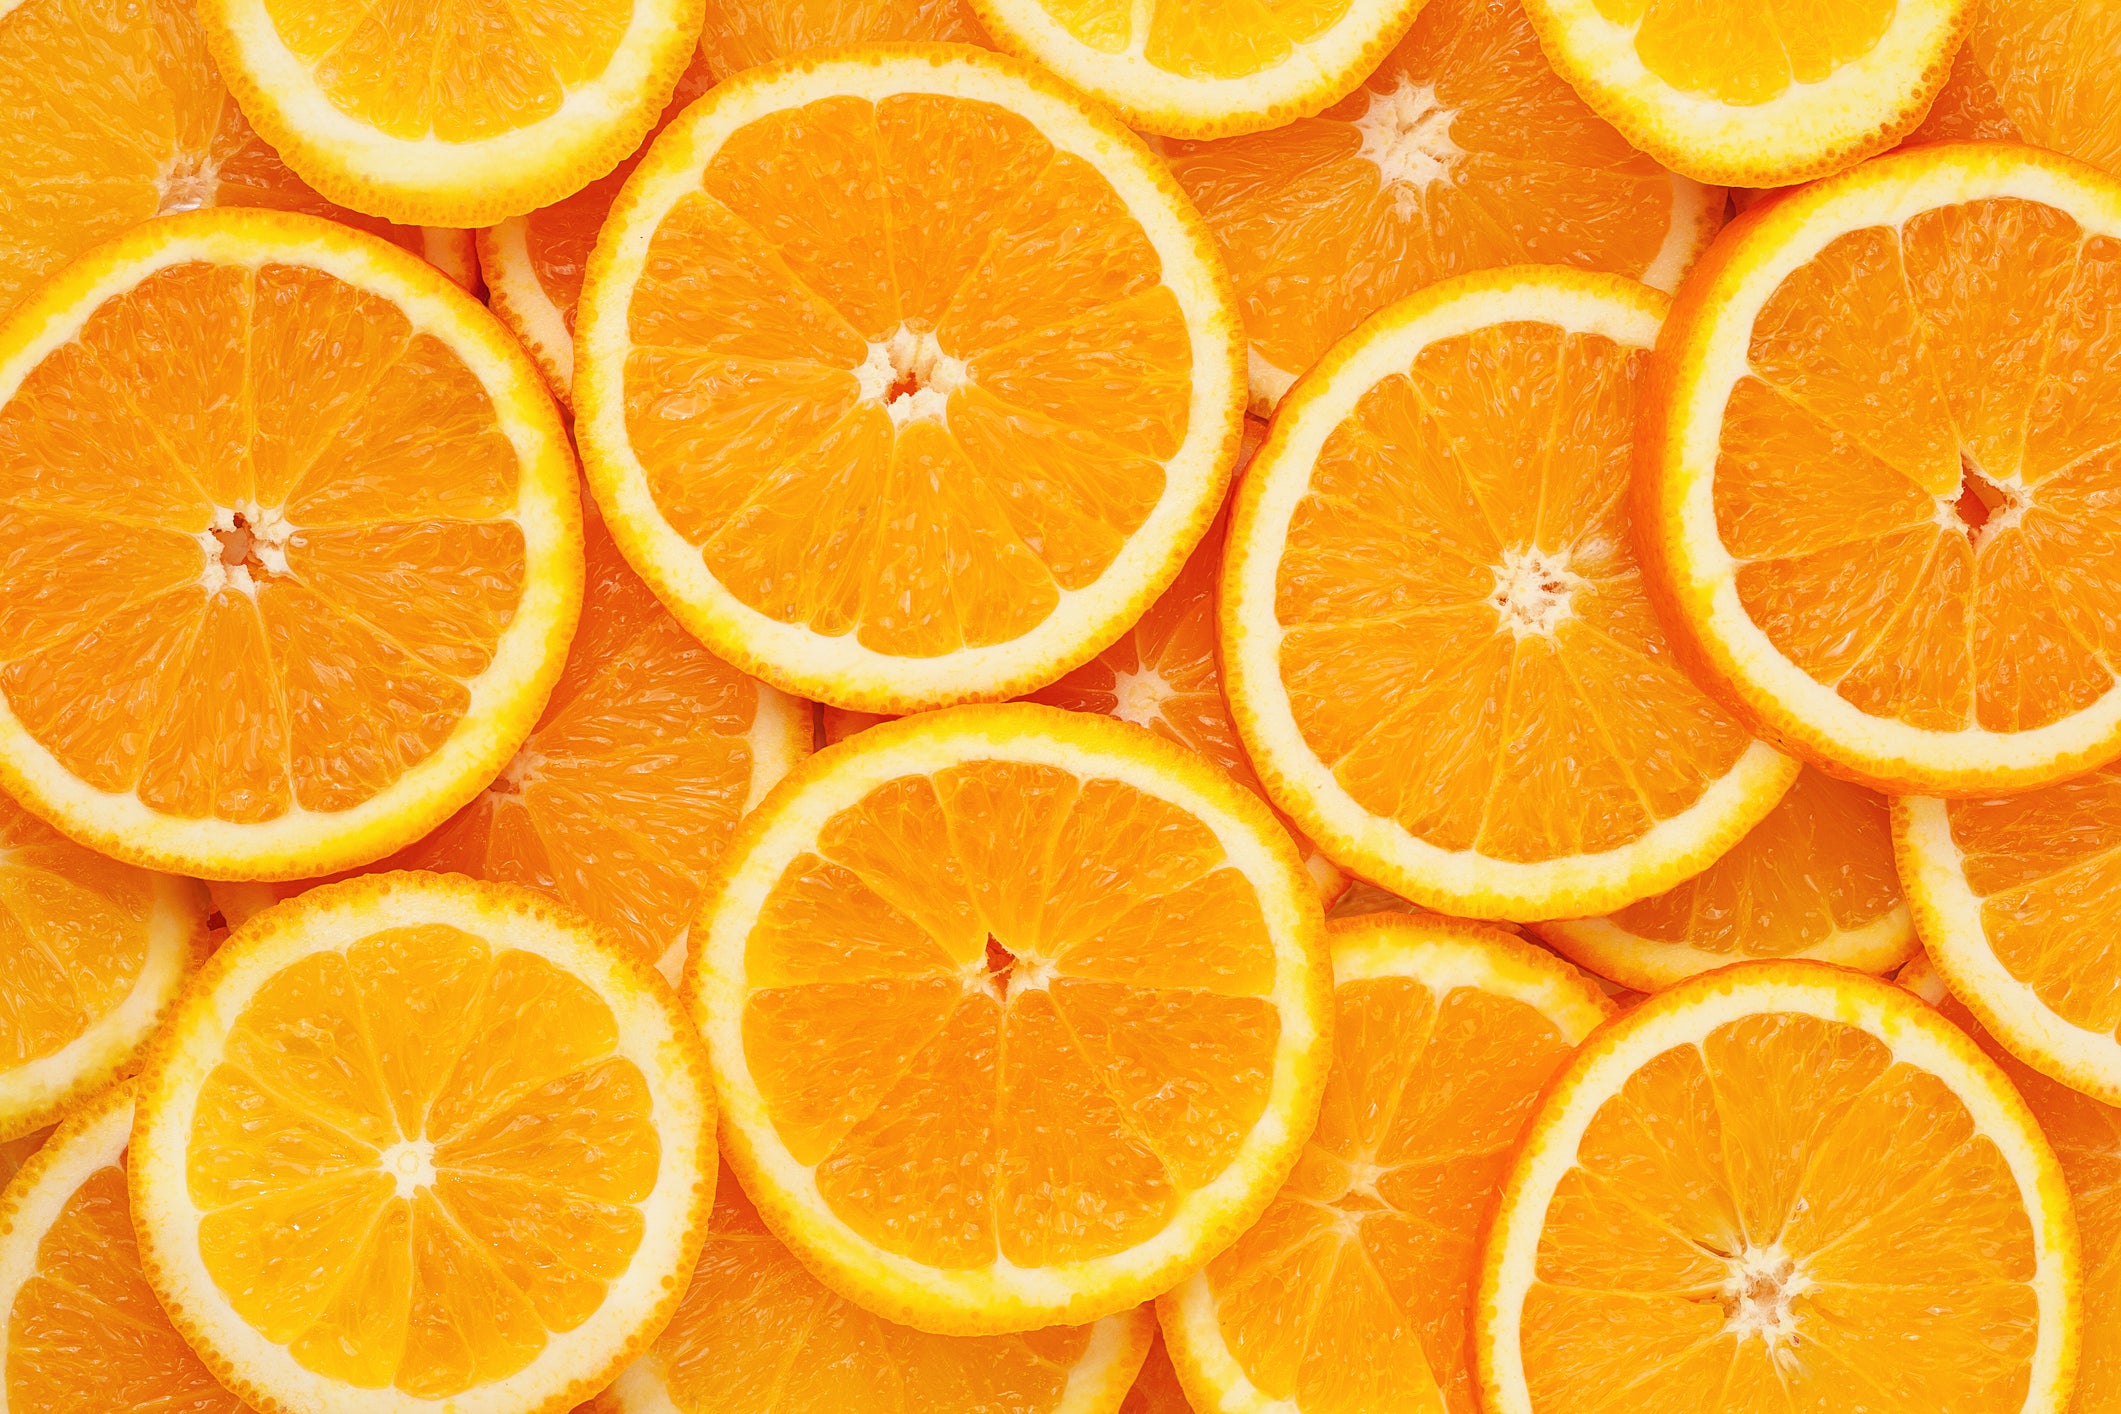 Citrus fruits such as oranges are an excellent source of vitamin C